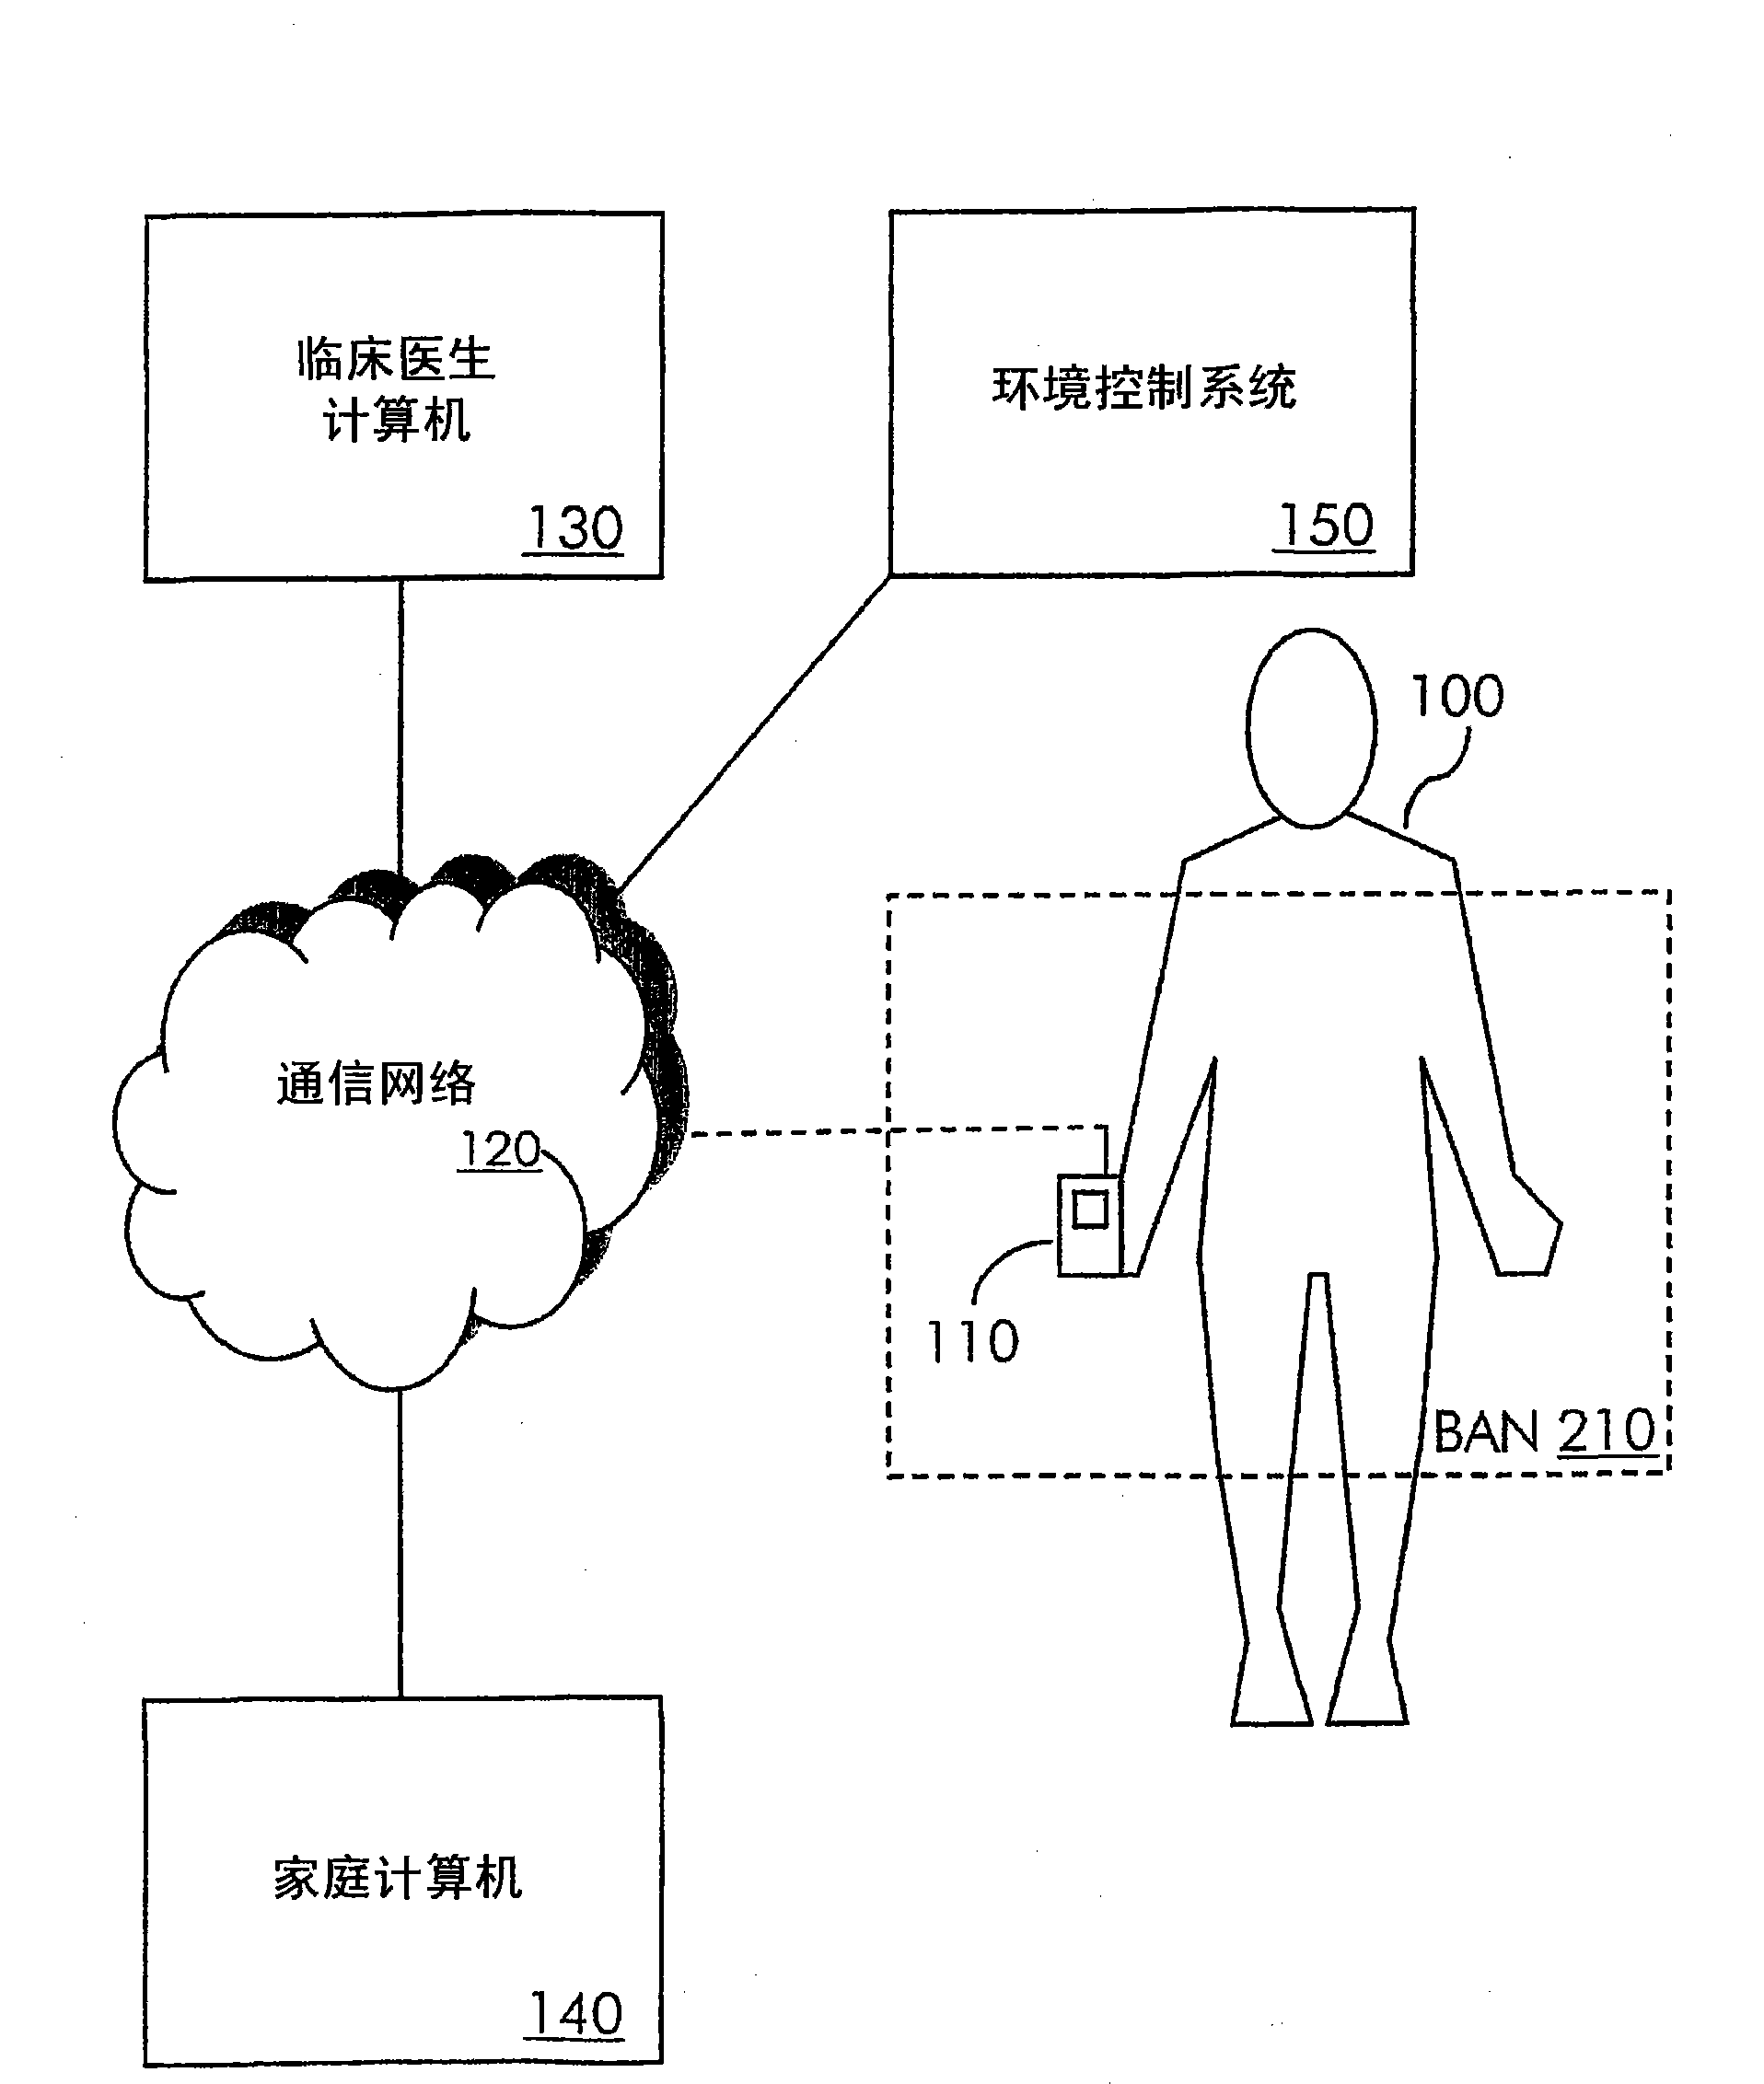 Method and system for self-monitoring of environment-related respiratory ailments